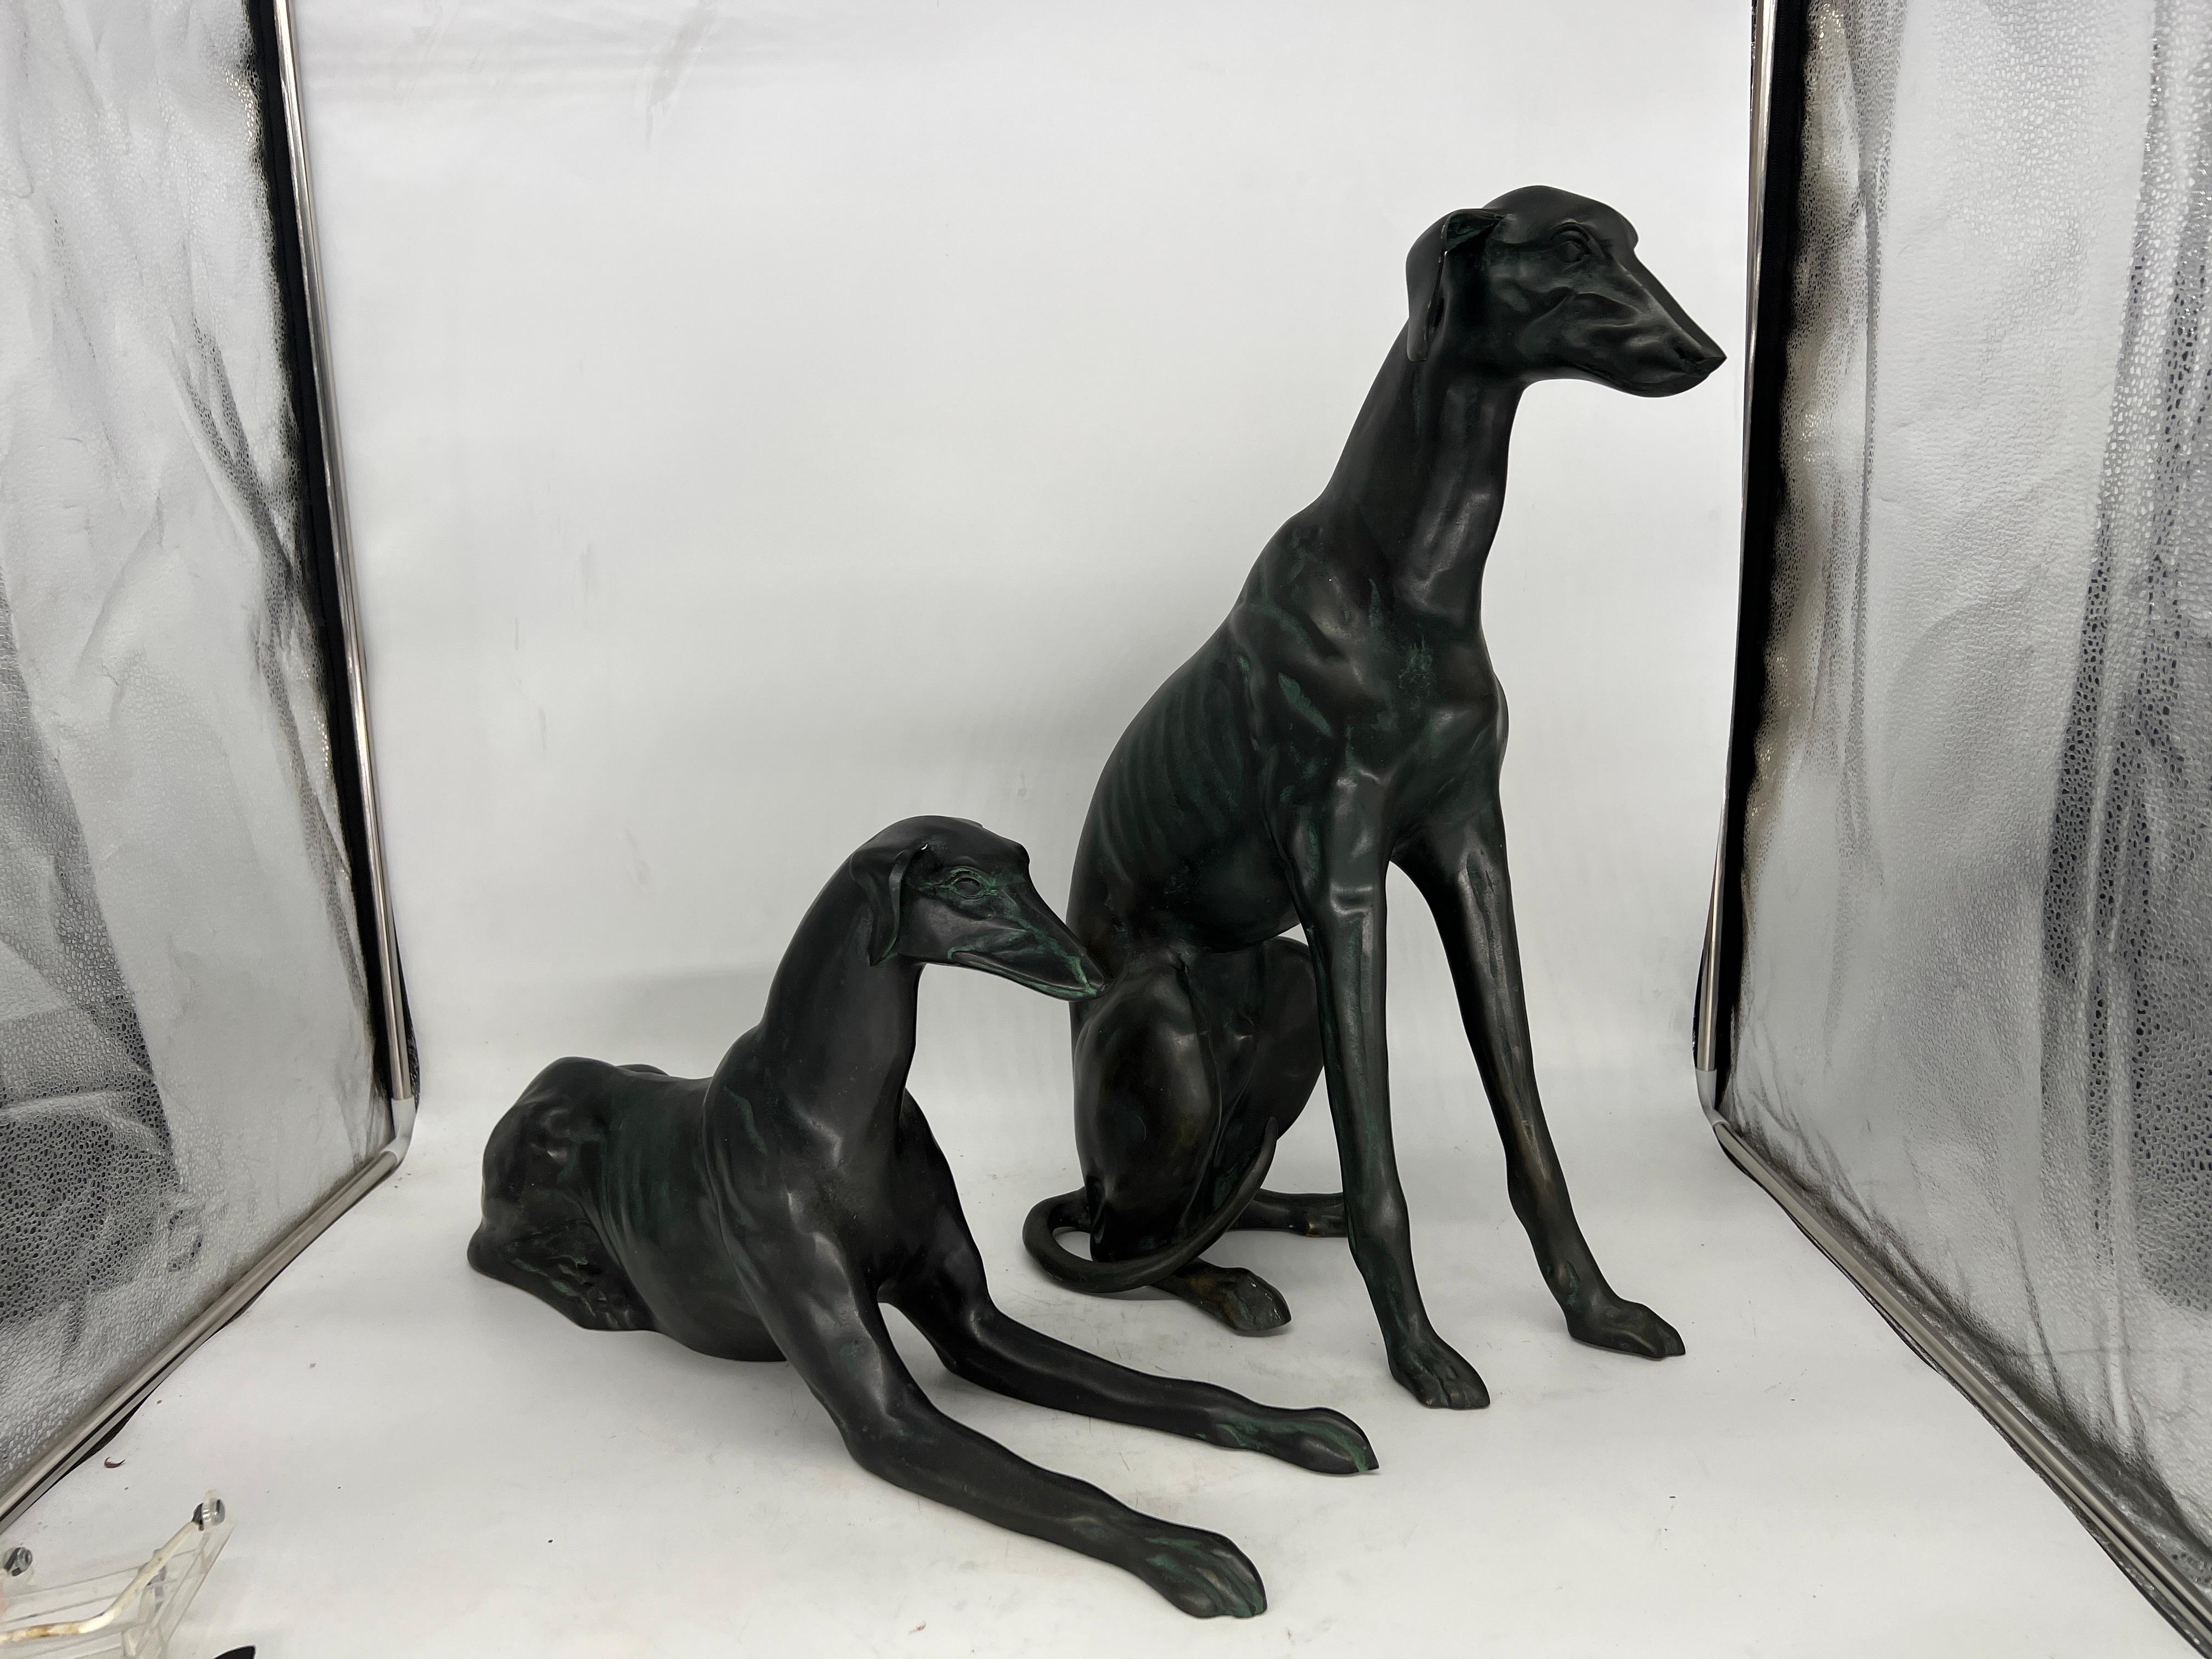 Pair, Heavy Bronze Whippet Dog Statues.

Each statue is cast in good quality bronze which have a green patination to surface. The whippets measure:
Lg Dog - 22.75 h 8 w 14.5 d
sm dog - 12.25 h 23 d 8 w